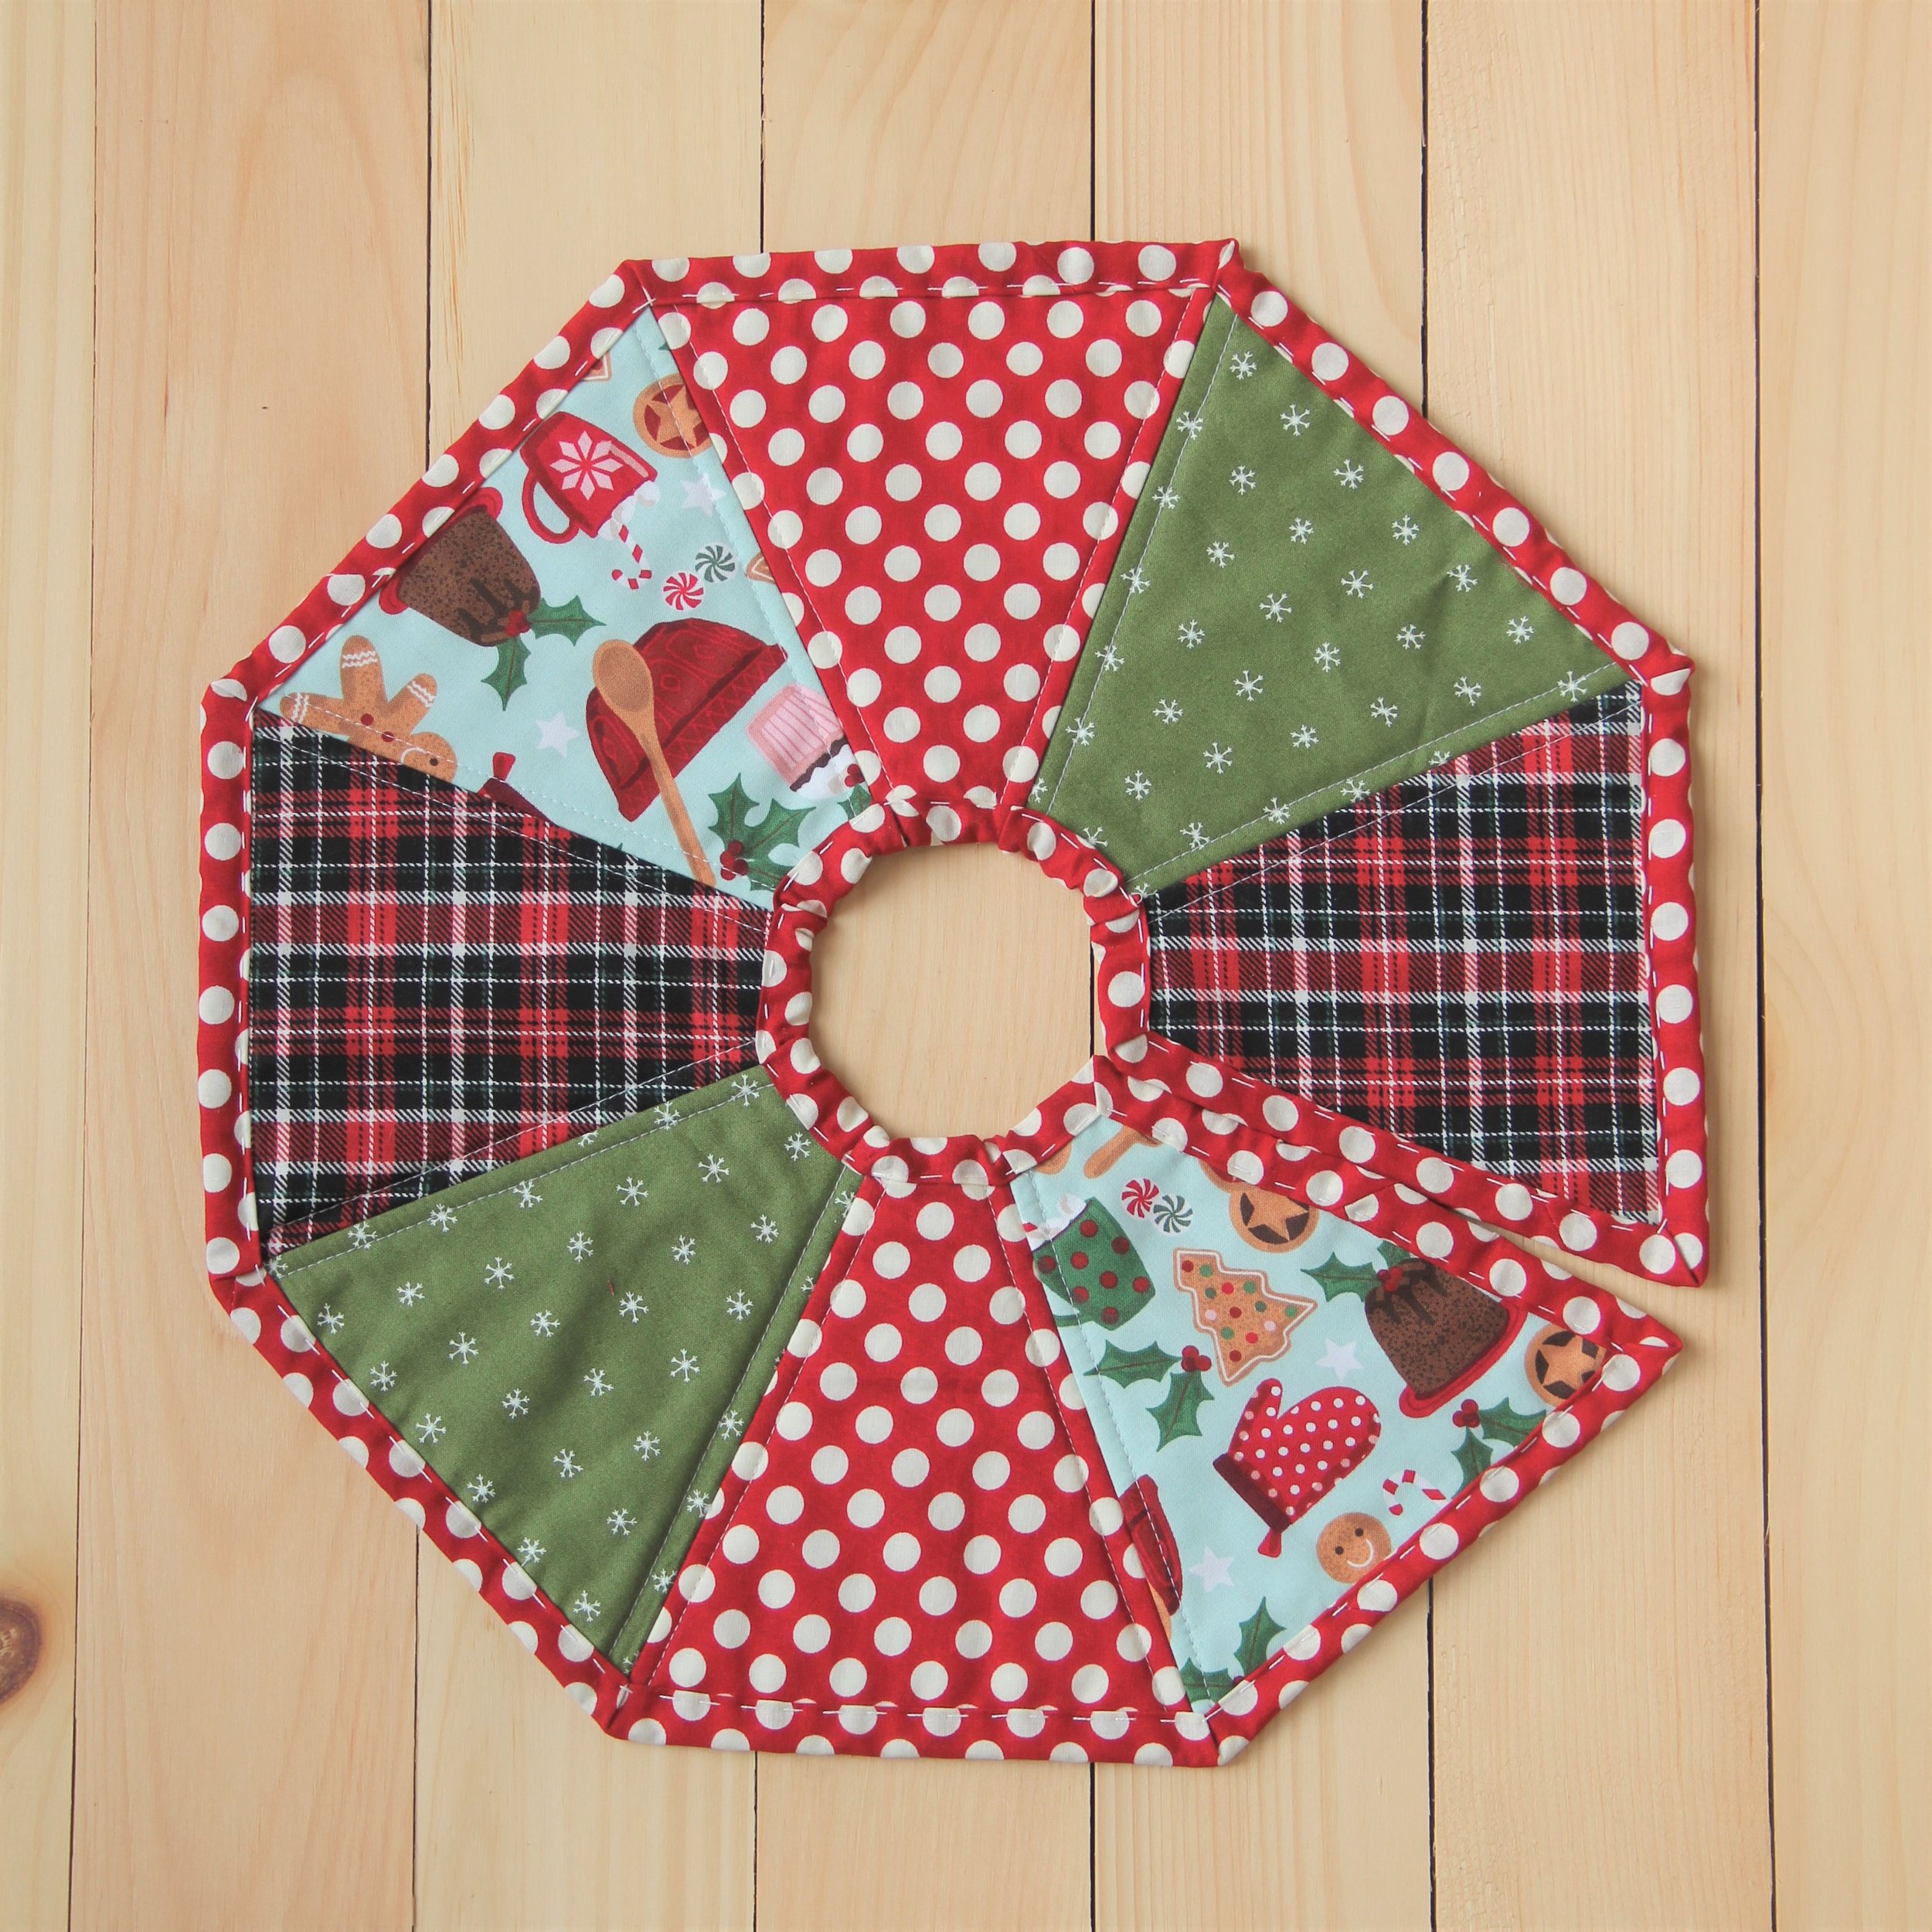 Quilt as you go mini tree skirt pattern